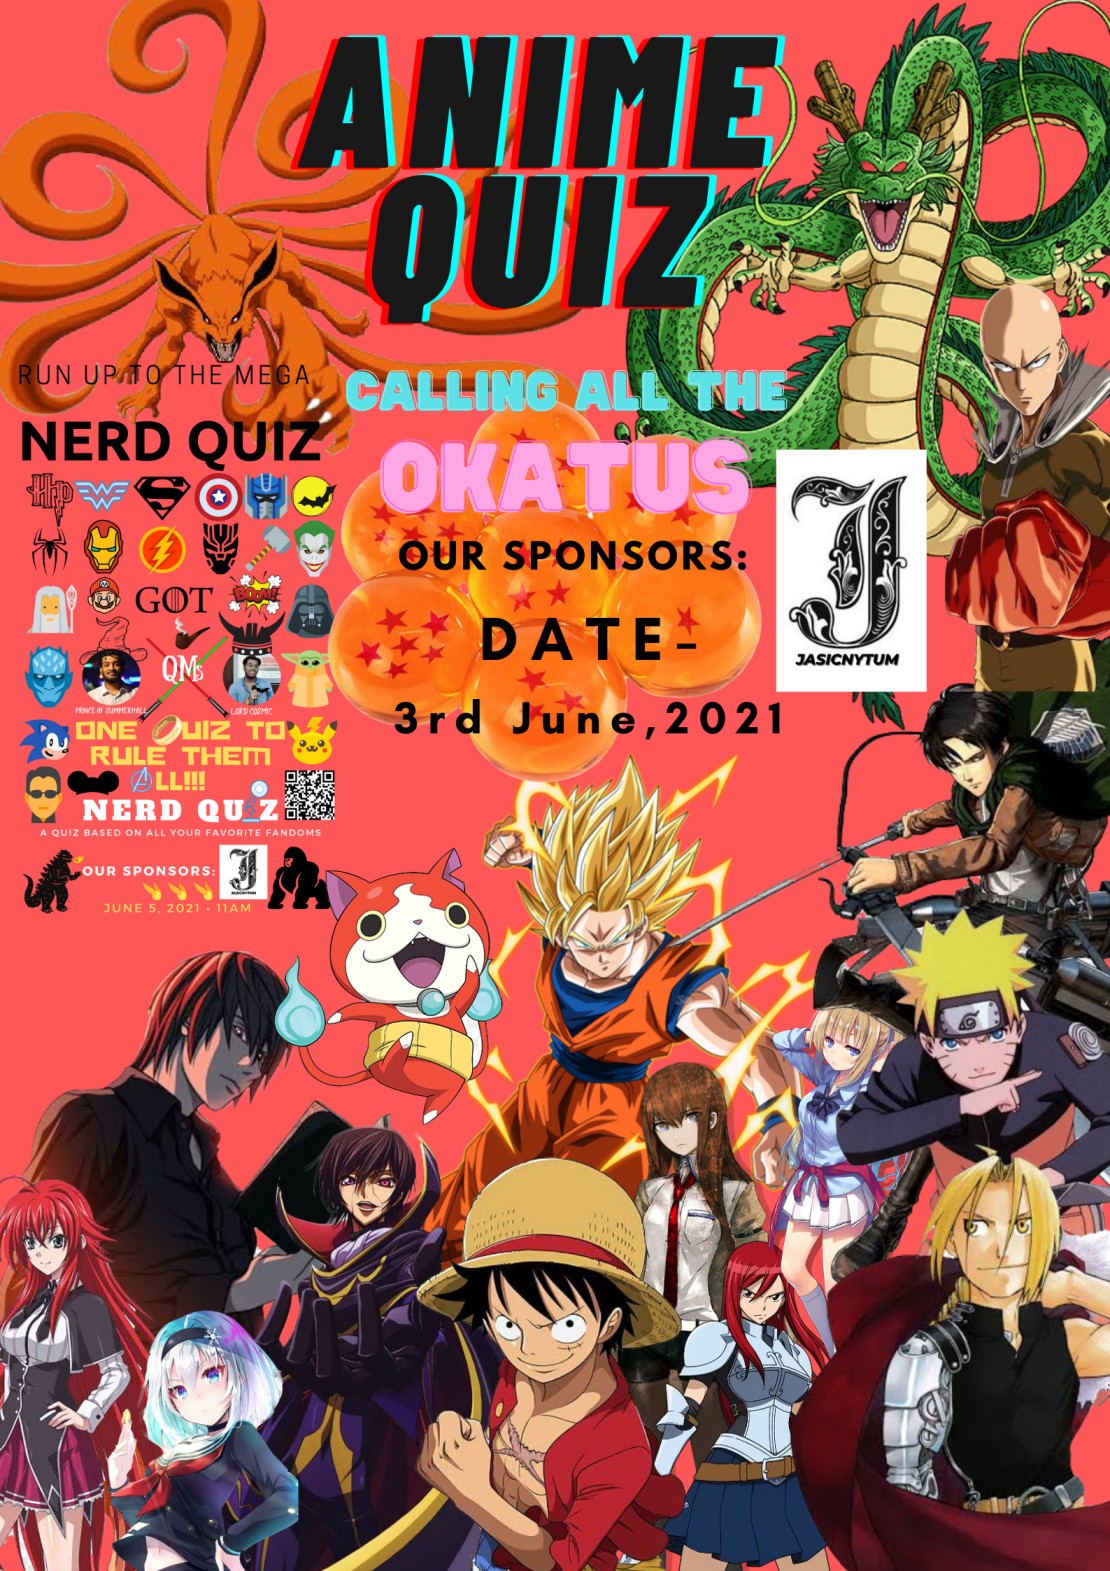 Synapse  Synapse2K19  Presenting The ANIME QUIZ For the FIRST TIME  in MAMC By Quaesitum the quiz club of Pravachya Our Literary  Society Date 26 MARCH 19 Venue New Lecture Theatre